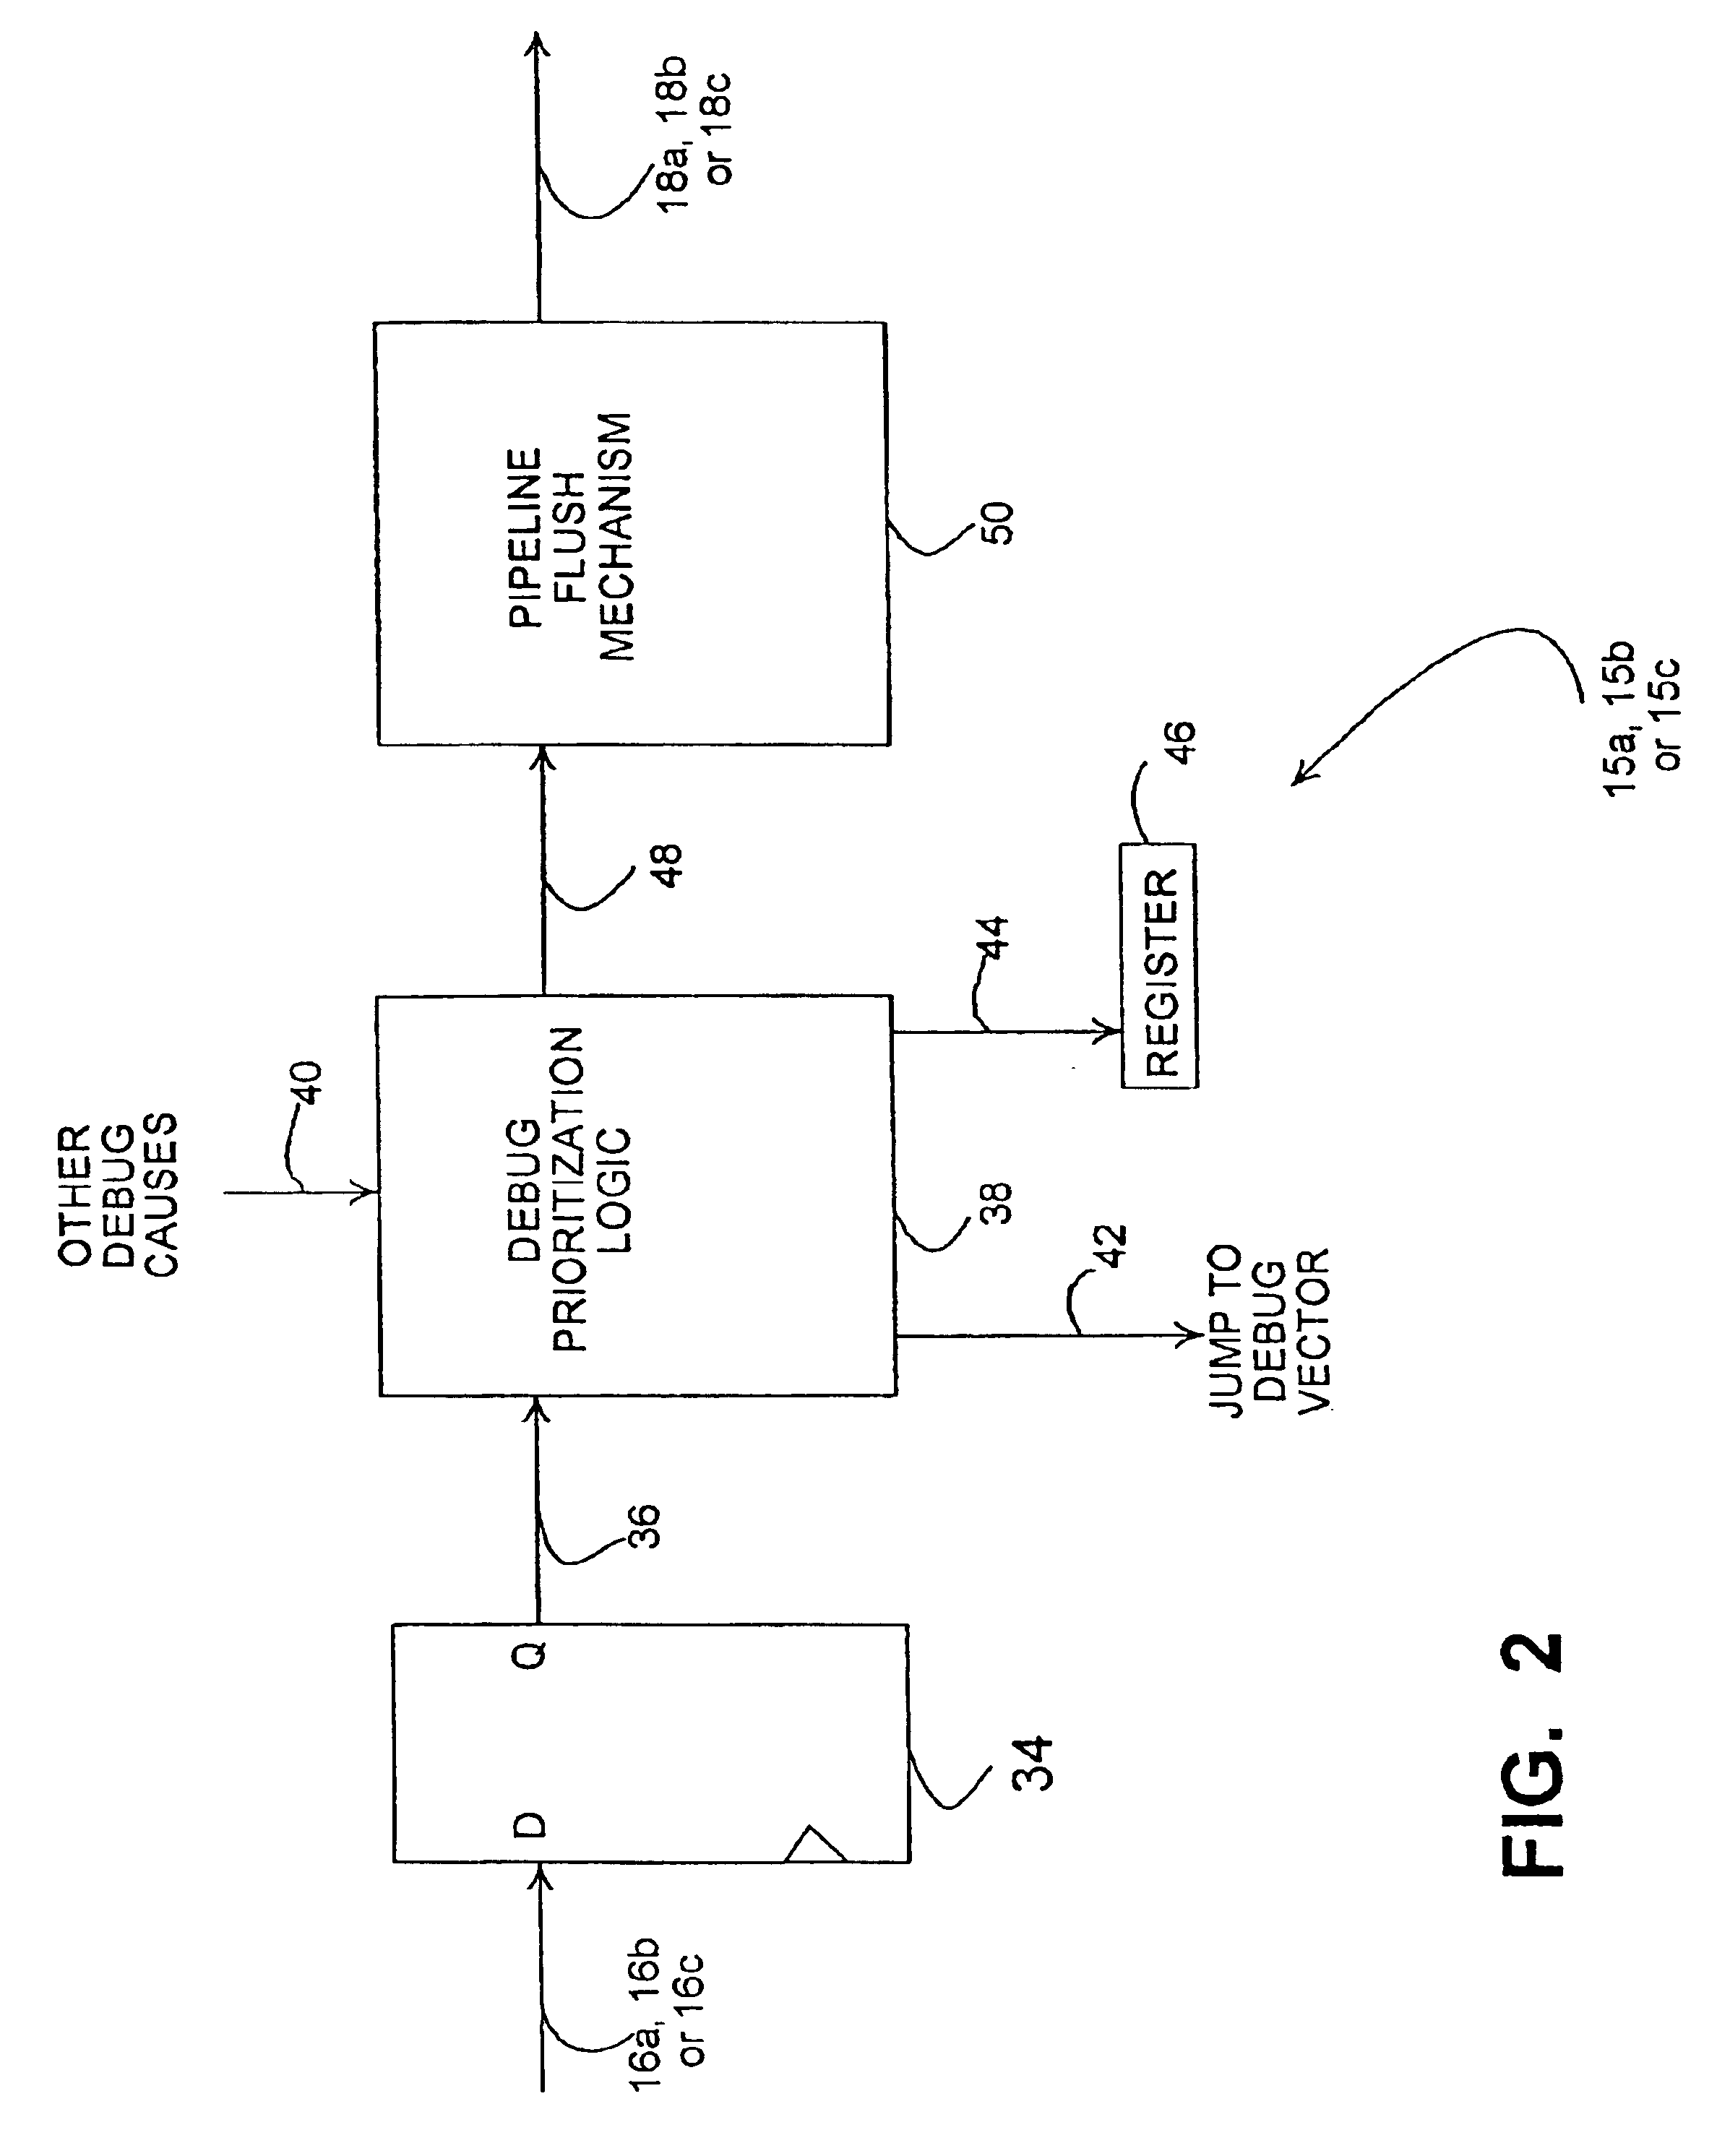 Multiprocessor system and method for simultaneously placing all processors into debug mode